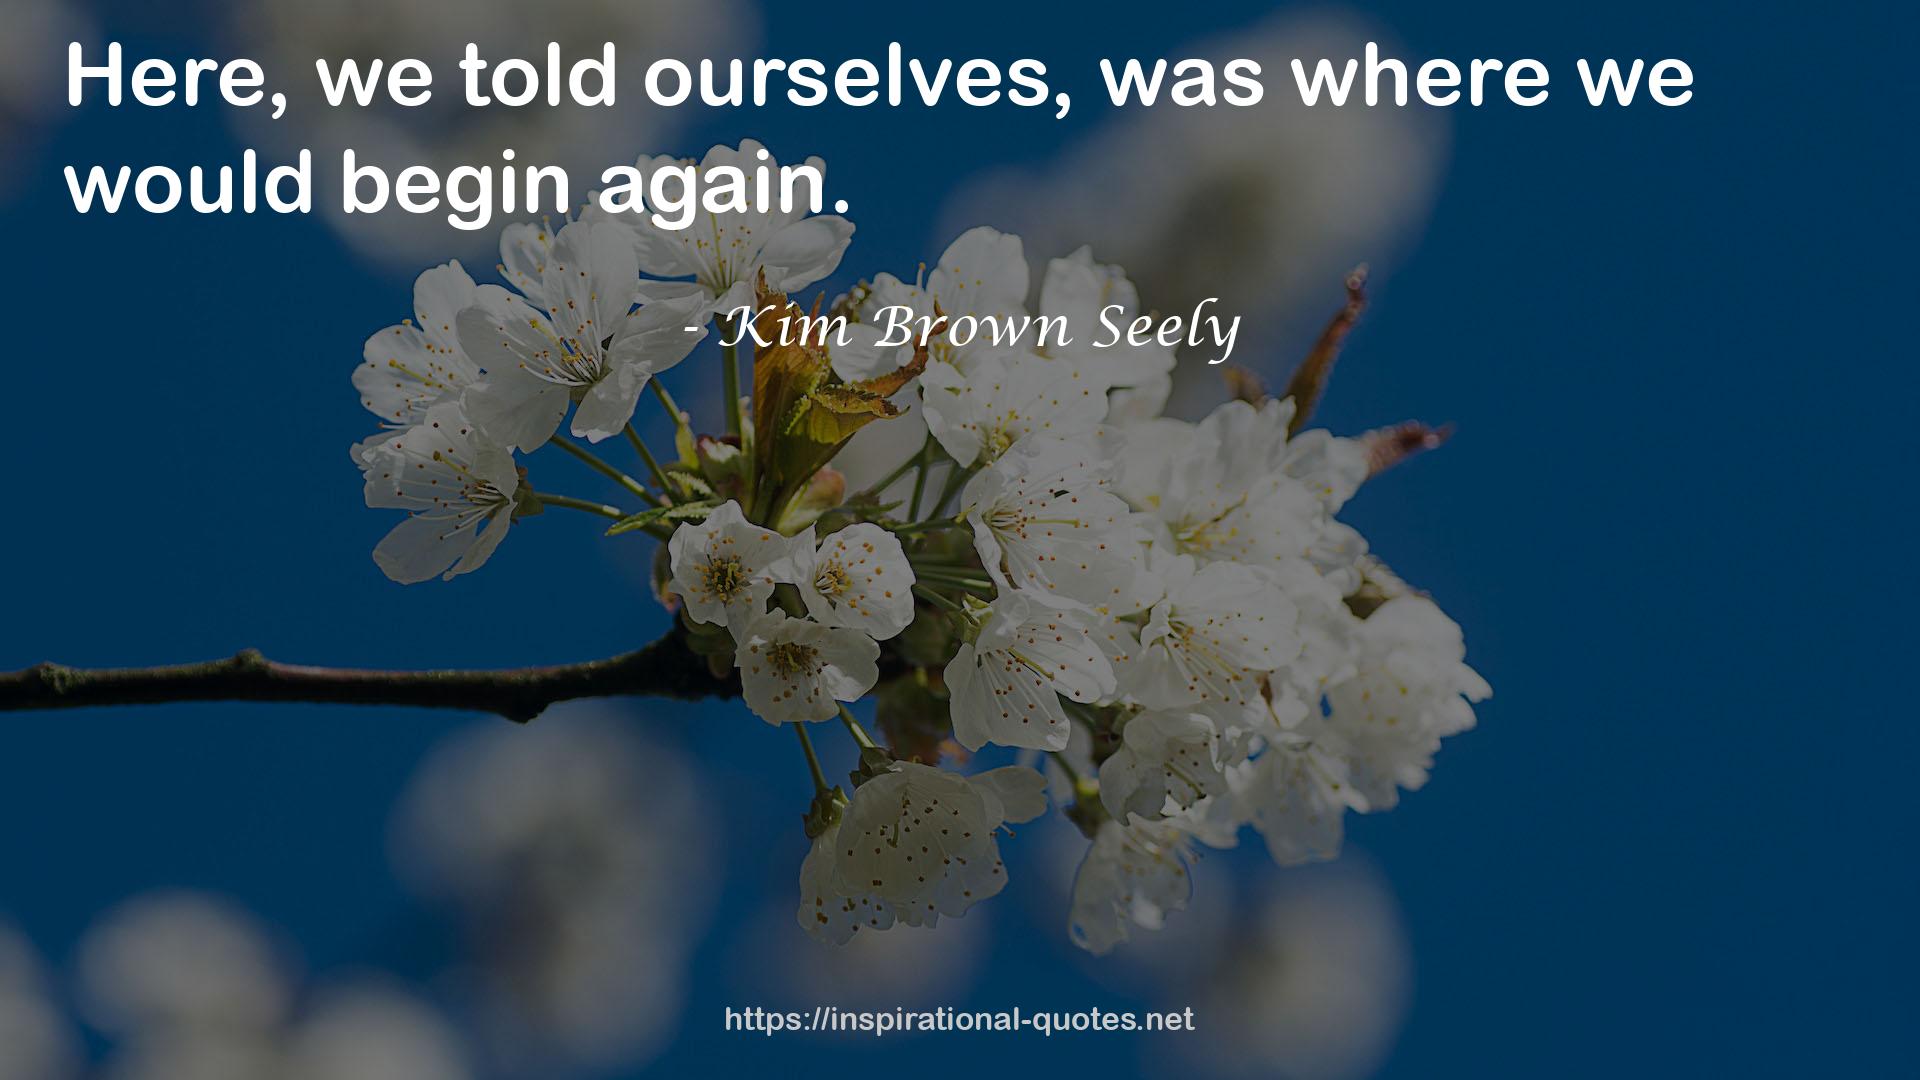 Kim Brown Seely QUOTES